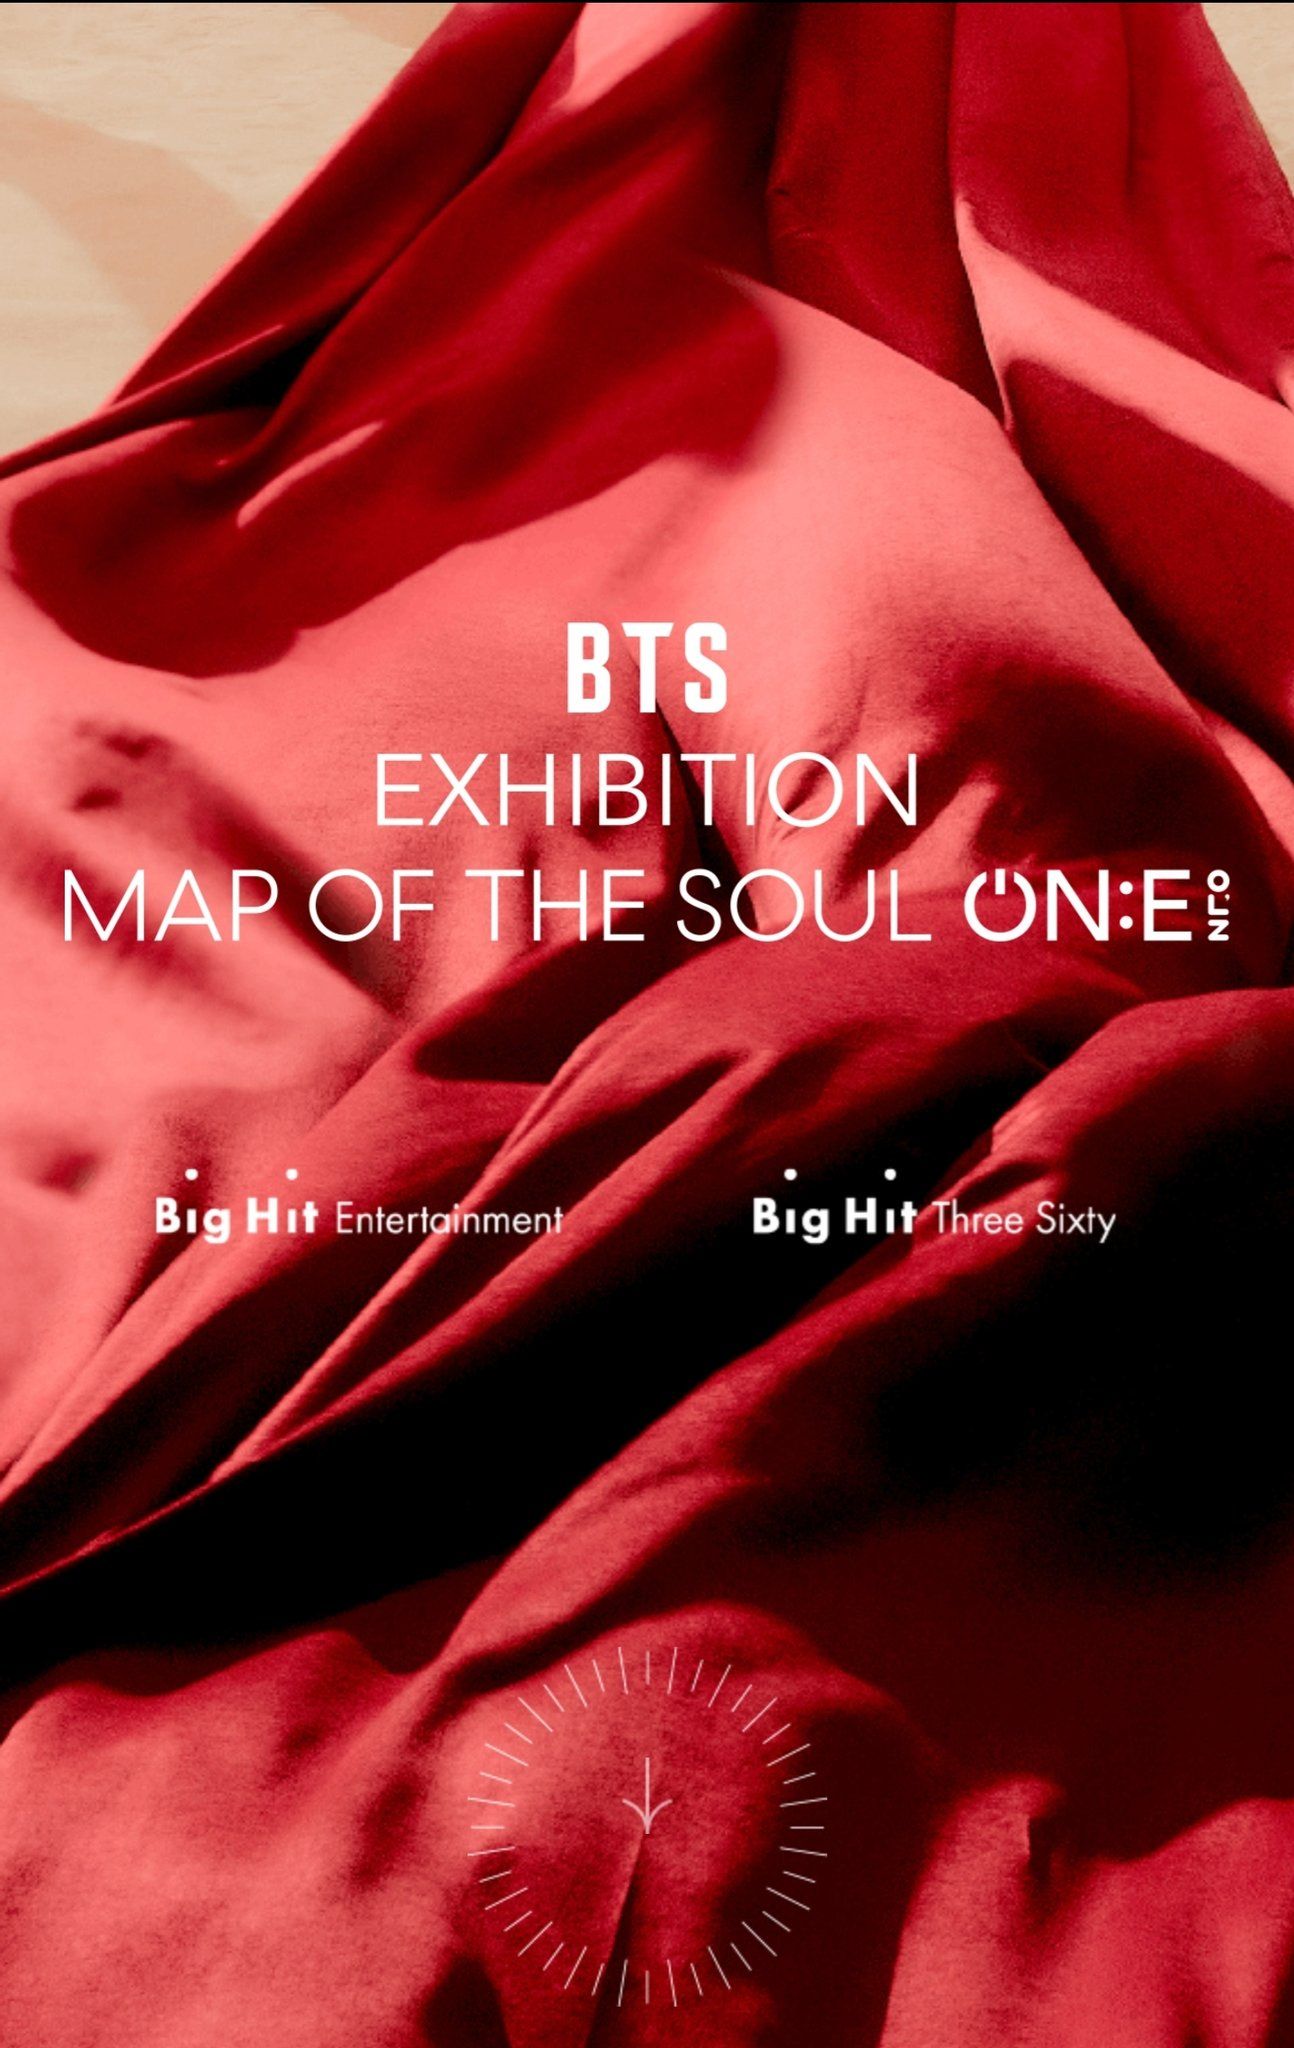 bts-to-host-online-exhibition-bts-exhibition-map-of-the-soul-one-in-october-3